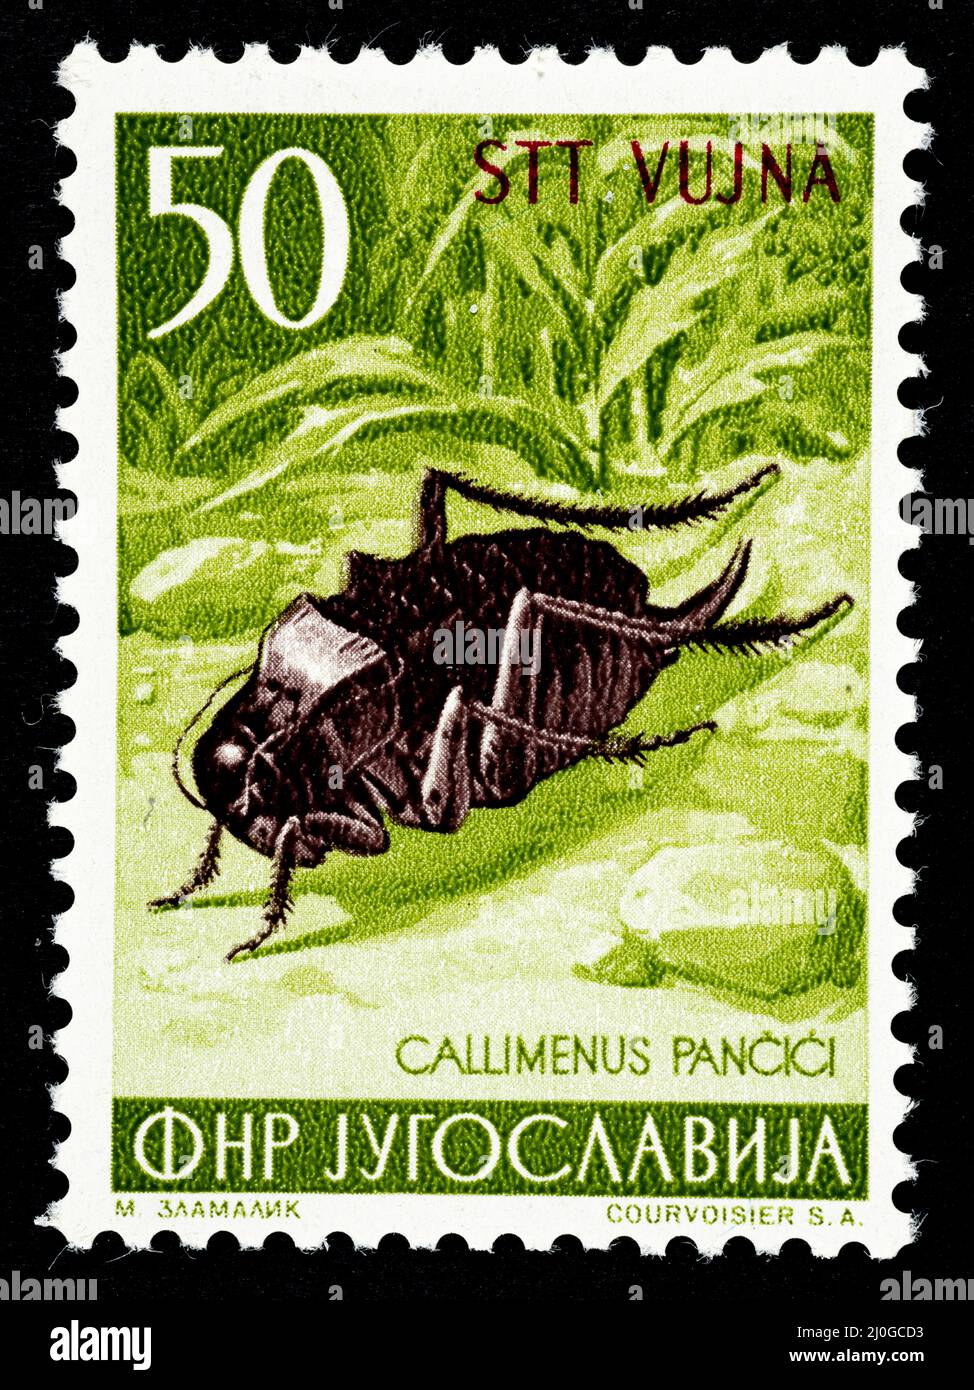 Commemorative postage stamp with the illustration of a cricket (Callimenus Pancici)  issued by the  former Yugoslavia overprinted STT VUJNA, free terr Stock Photo